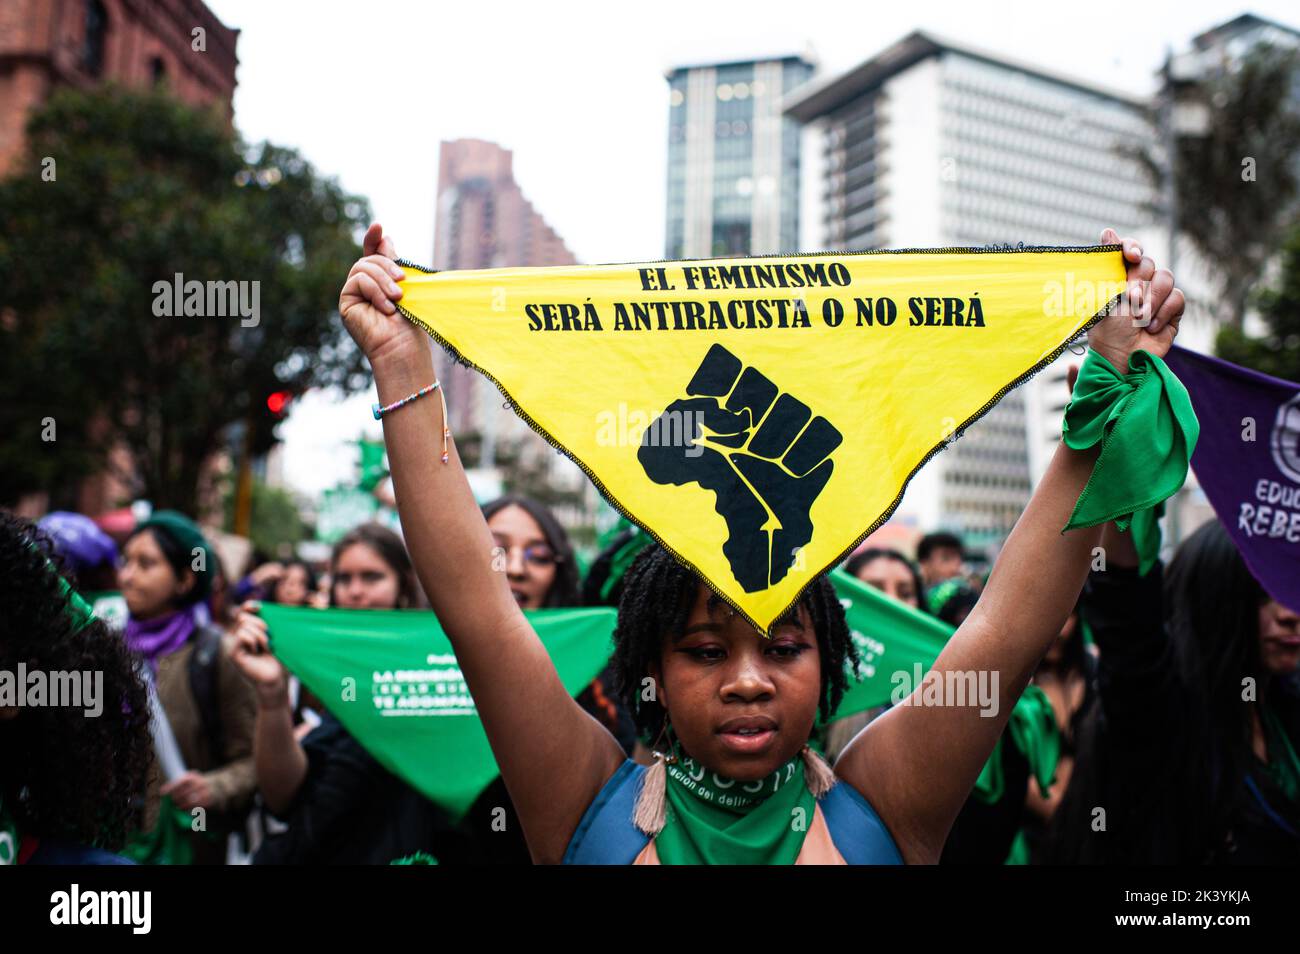 Bogota, Colombia. 28th Sep, 2022. A demonstrator holds a flag that reads 'Feminism has to anti-racist or it will not be' during the International Day for the Remembrance of the Slave Trade and its Abolition demonstrations in Bogota, Colombia, September 28, 2022. Colombia became one of the first countries in Latin America to decriminalize abortions up to week 24. Photo by: Chepa Beltran/Long Visual Press Credit: Long Visual Press/Alamy Live News Stock Photo